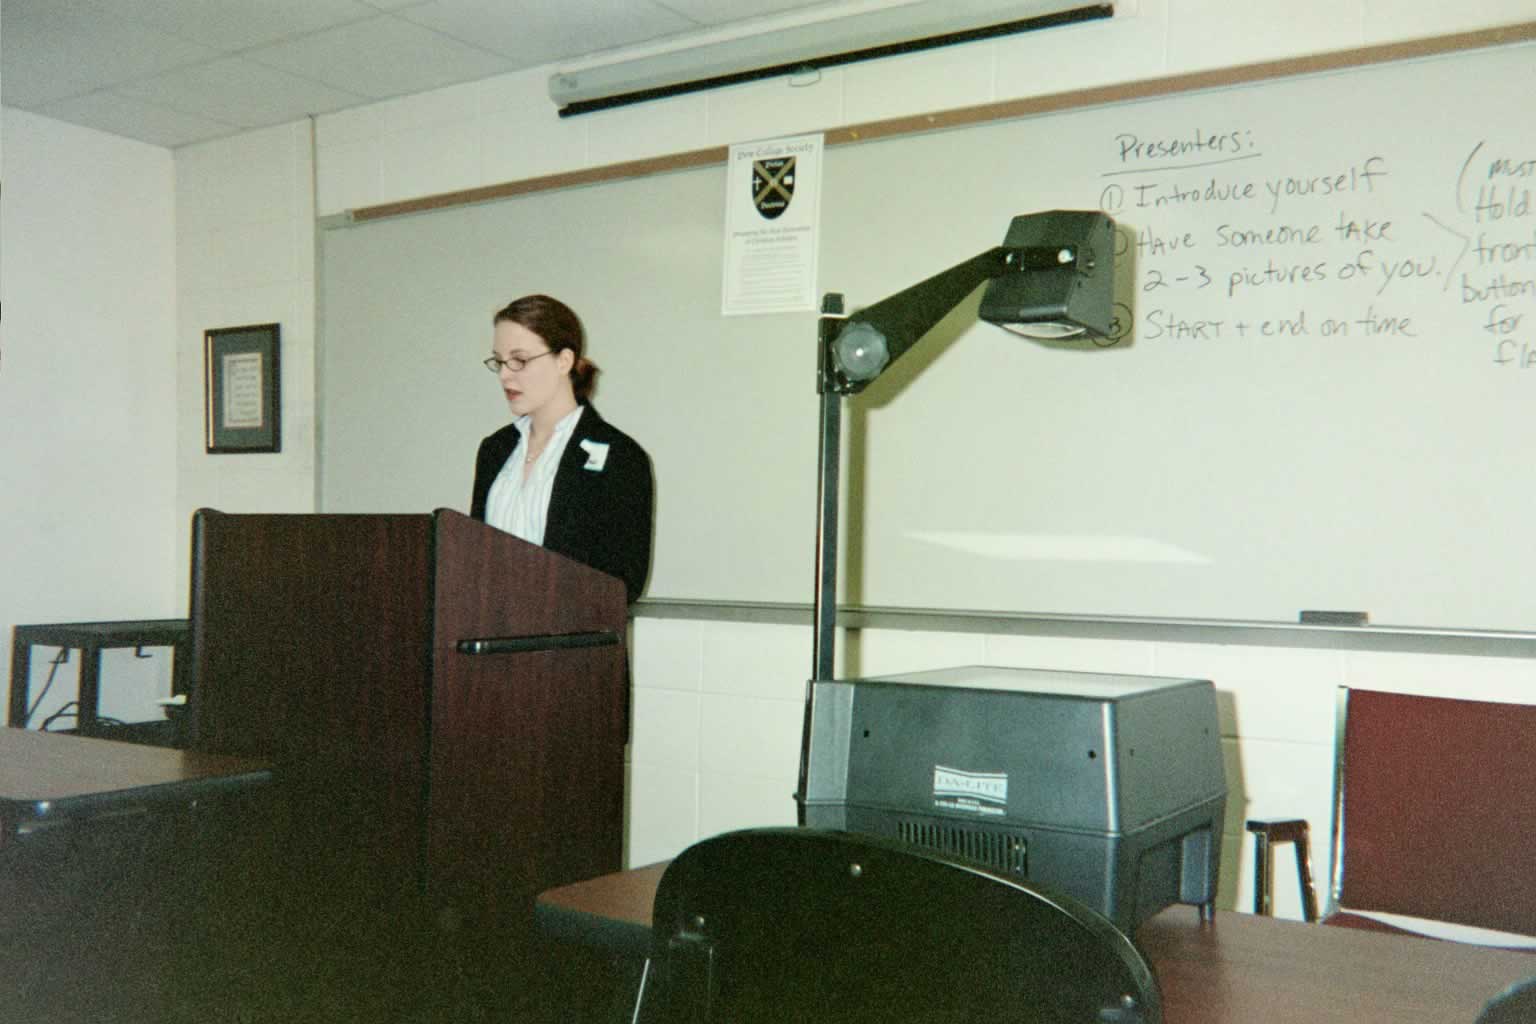 picture of a woman in glasses speaking behind a podium in a classroom